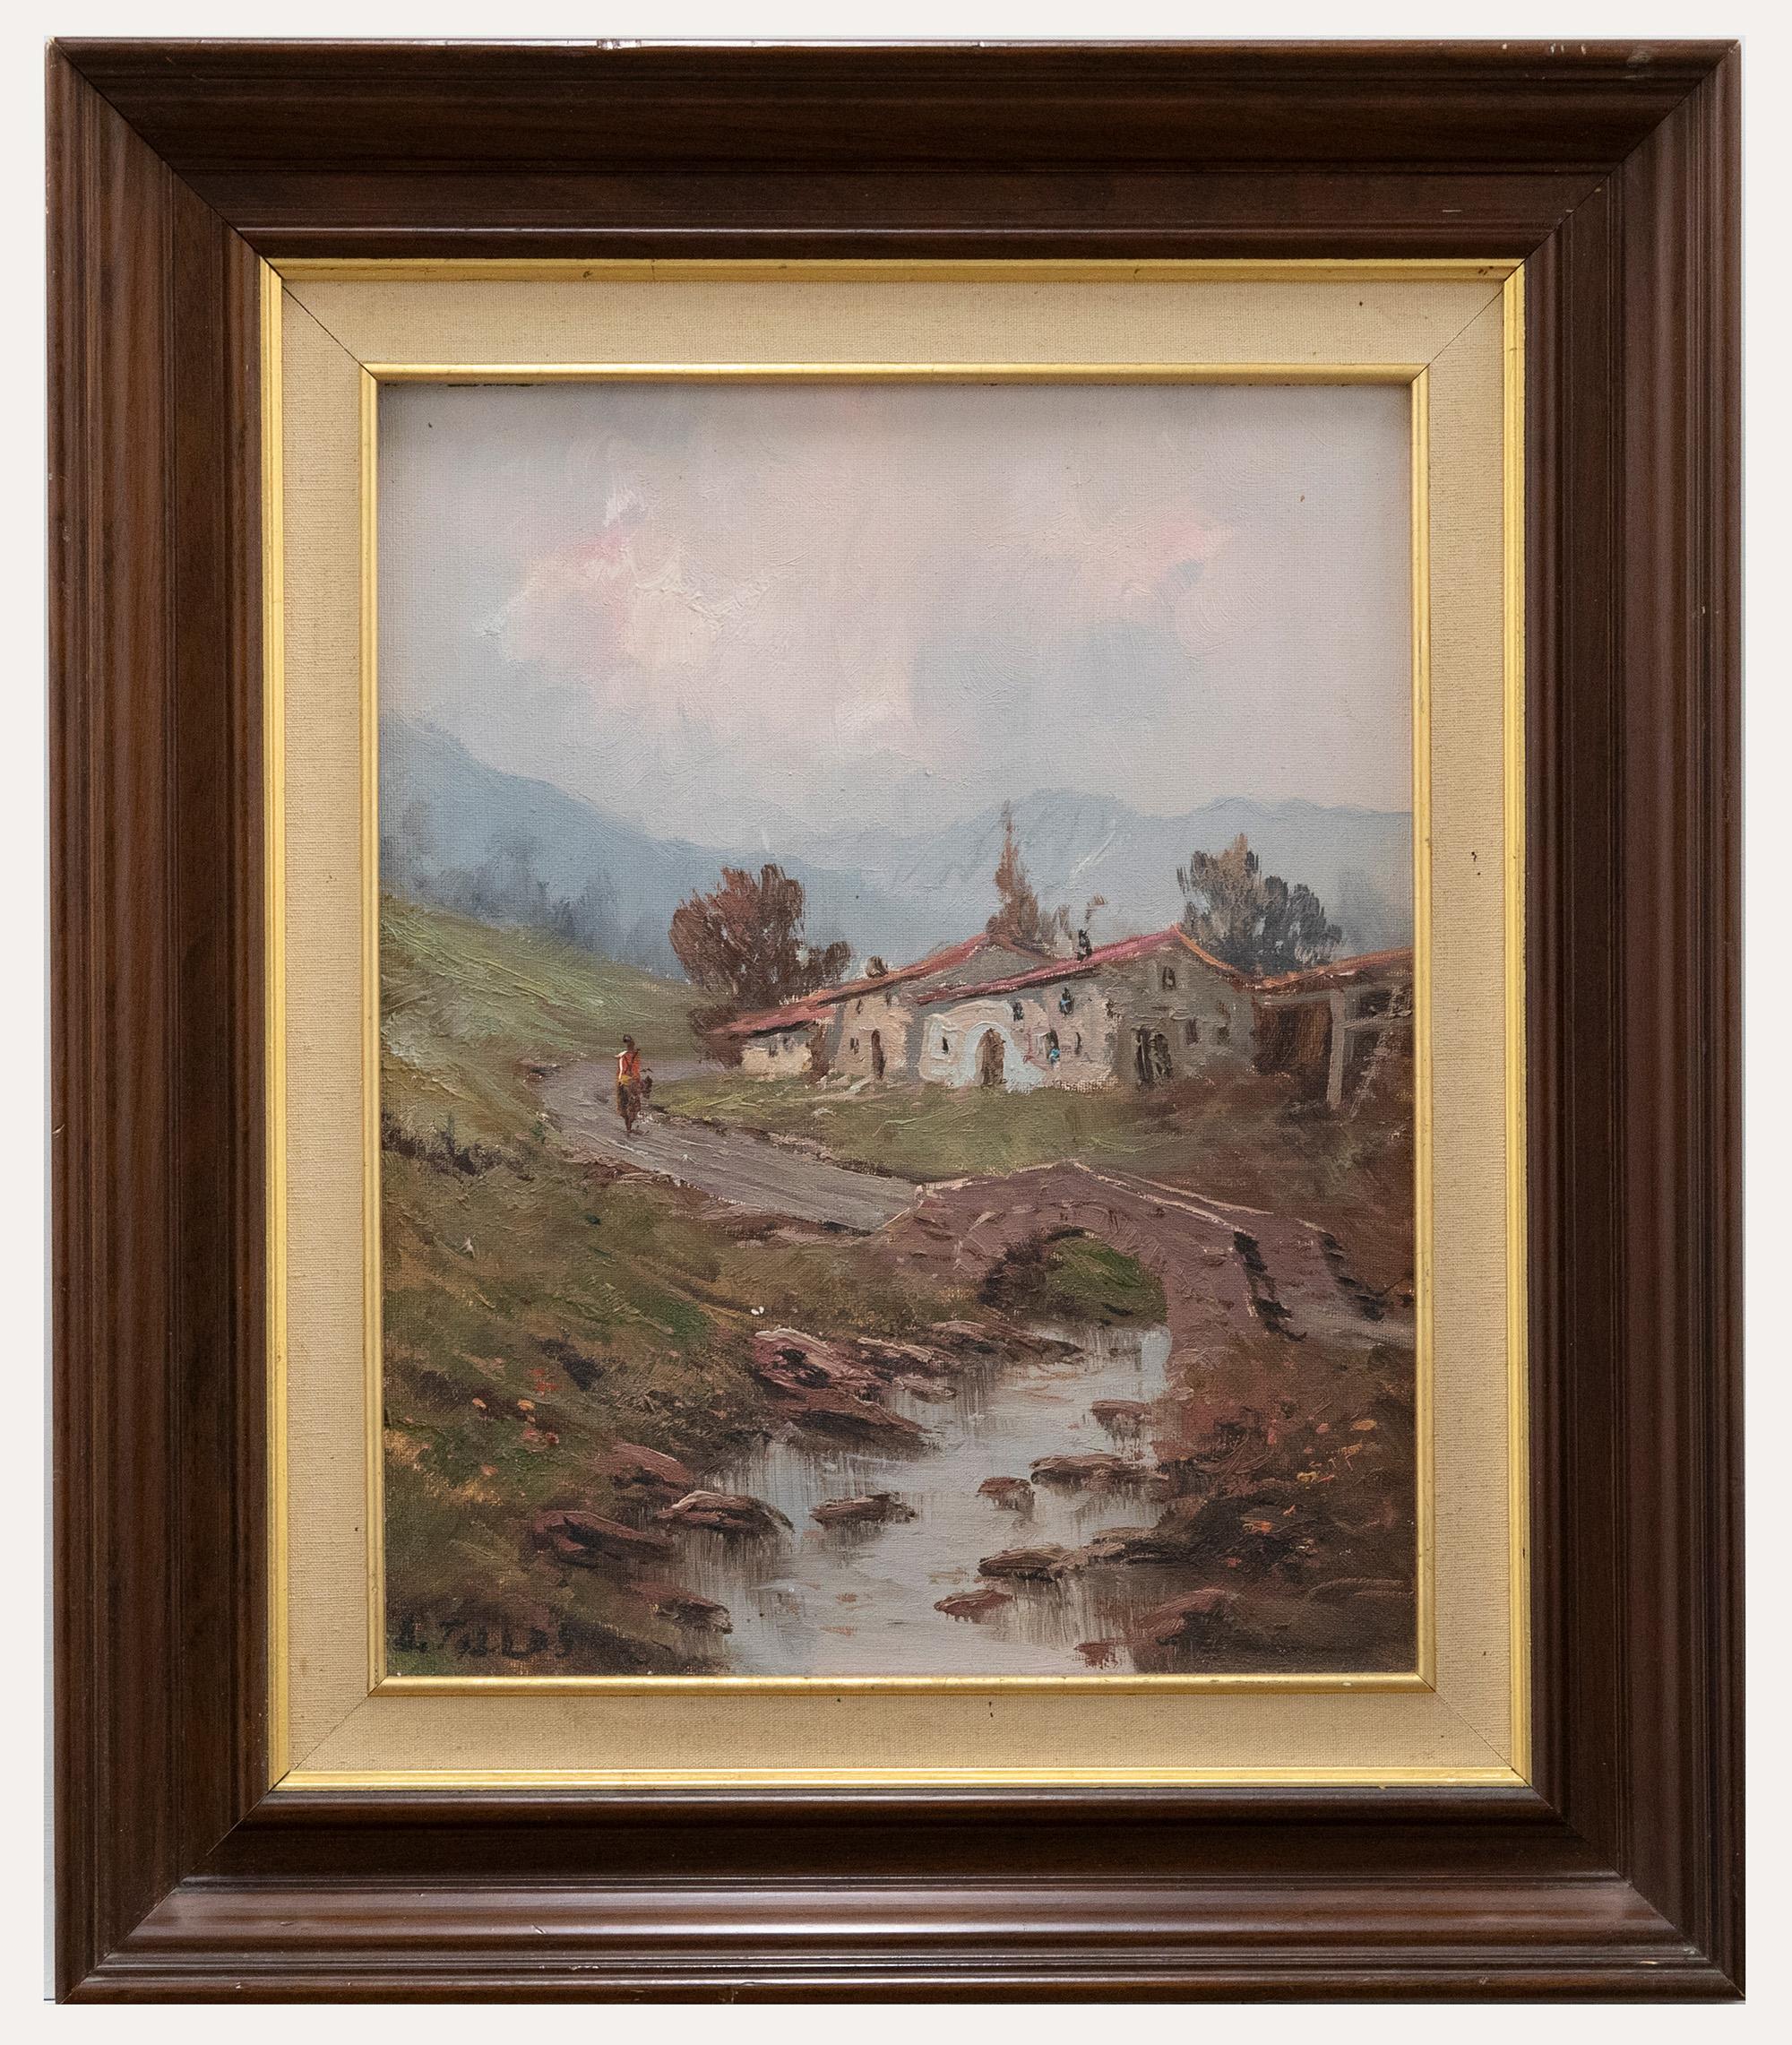 Unknown Landscape Painting - Framed 20th Century Oil - A Gentle Stream